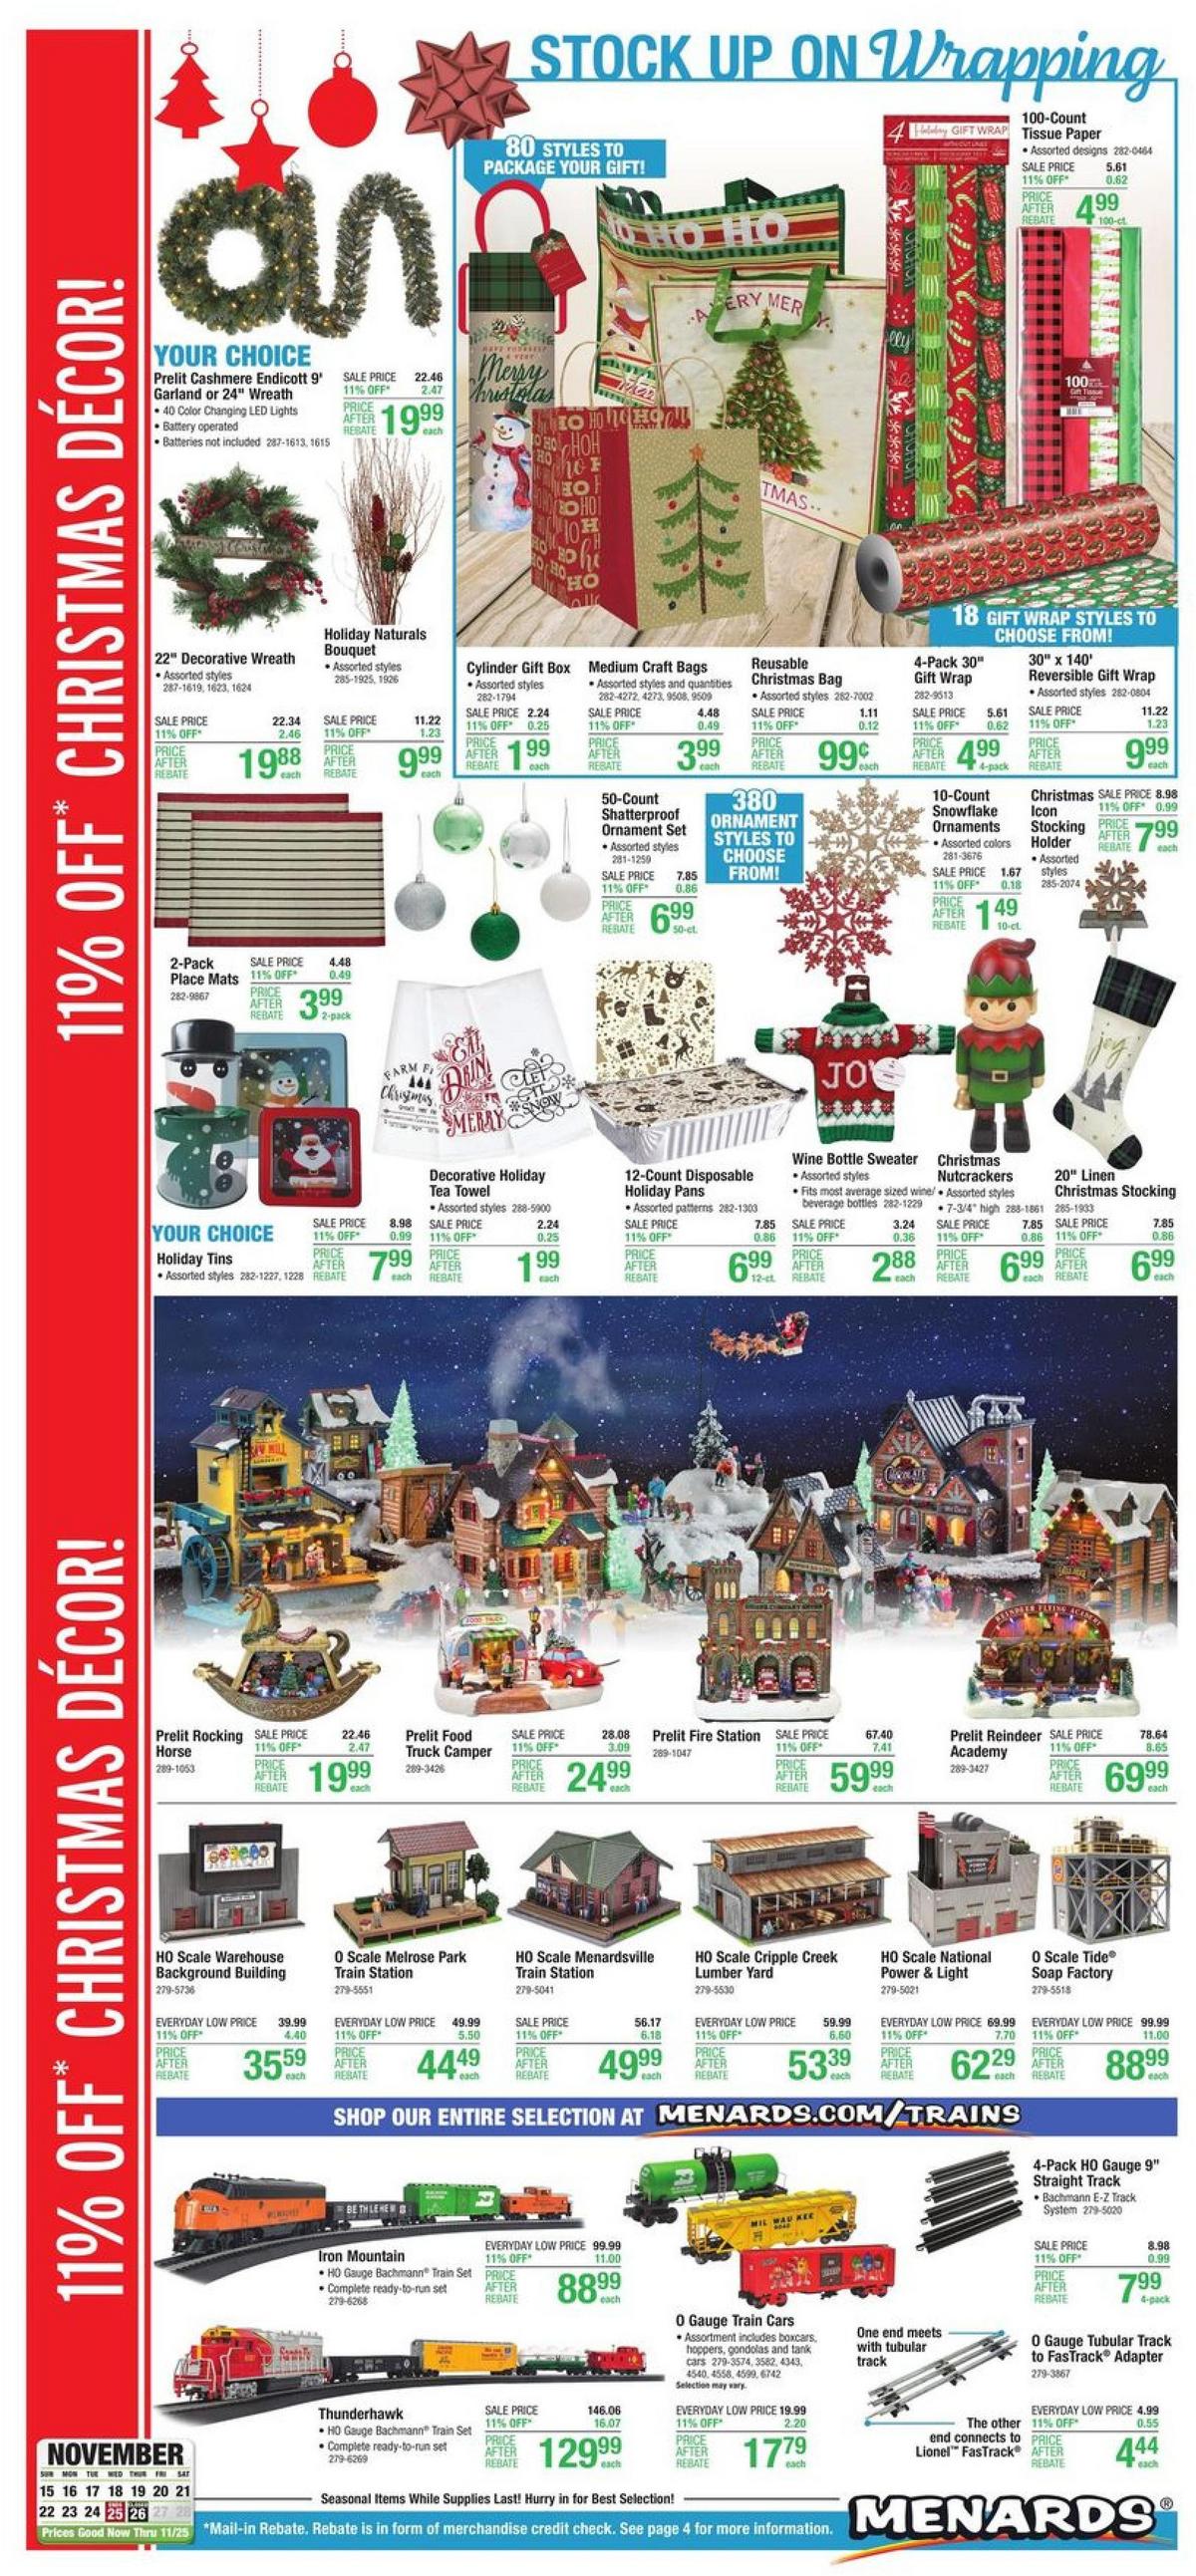 Menards Christmas Decor Sale Weekly Ads & Special Buys from November 15